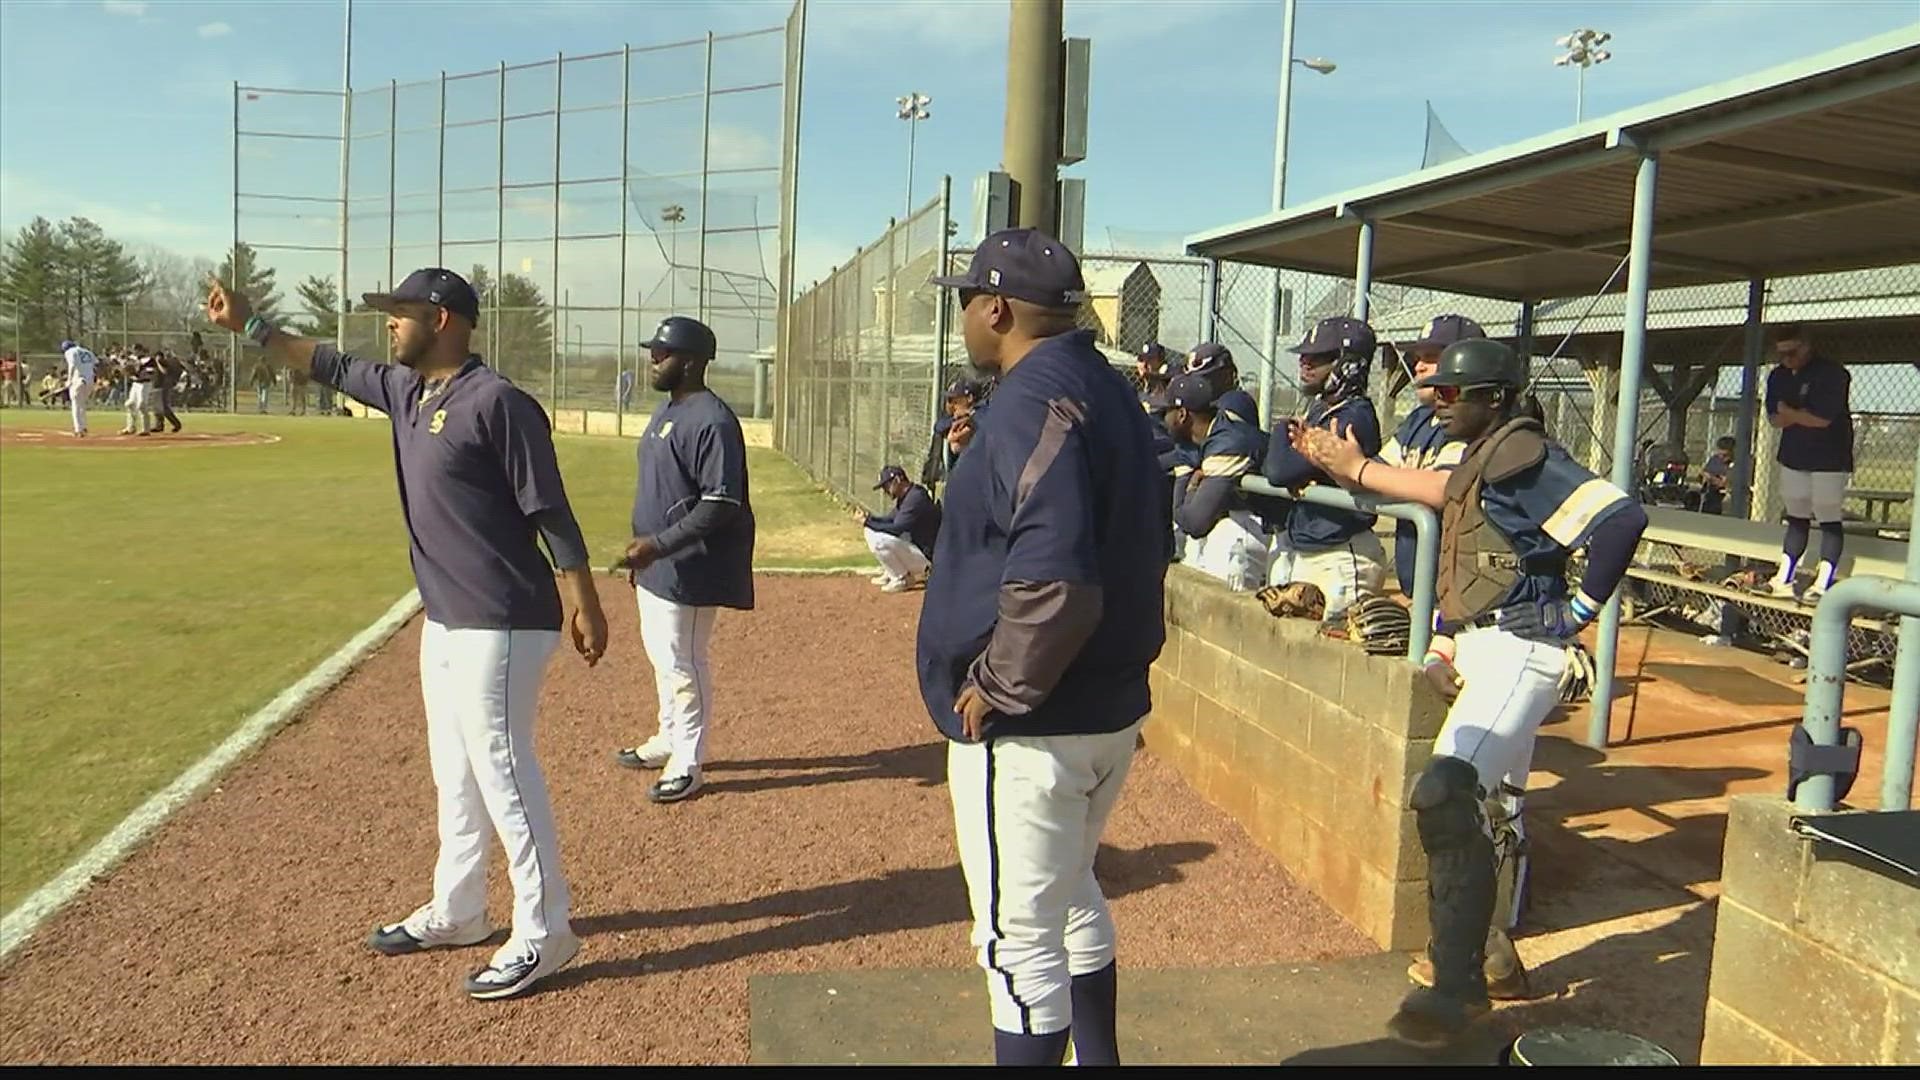 Stillman made their way to the Rocket City and swept Oakwood on the baseball diamond with final scores of 26-2 & 21-0